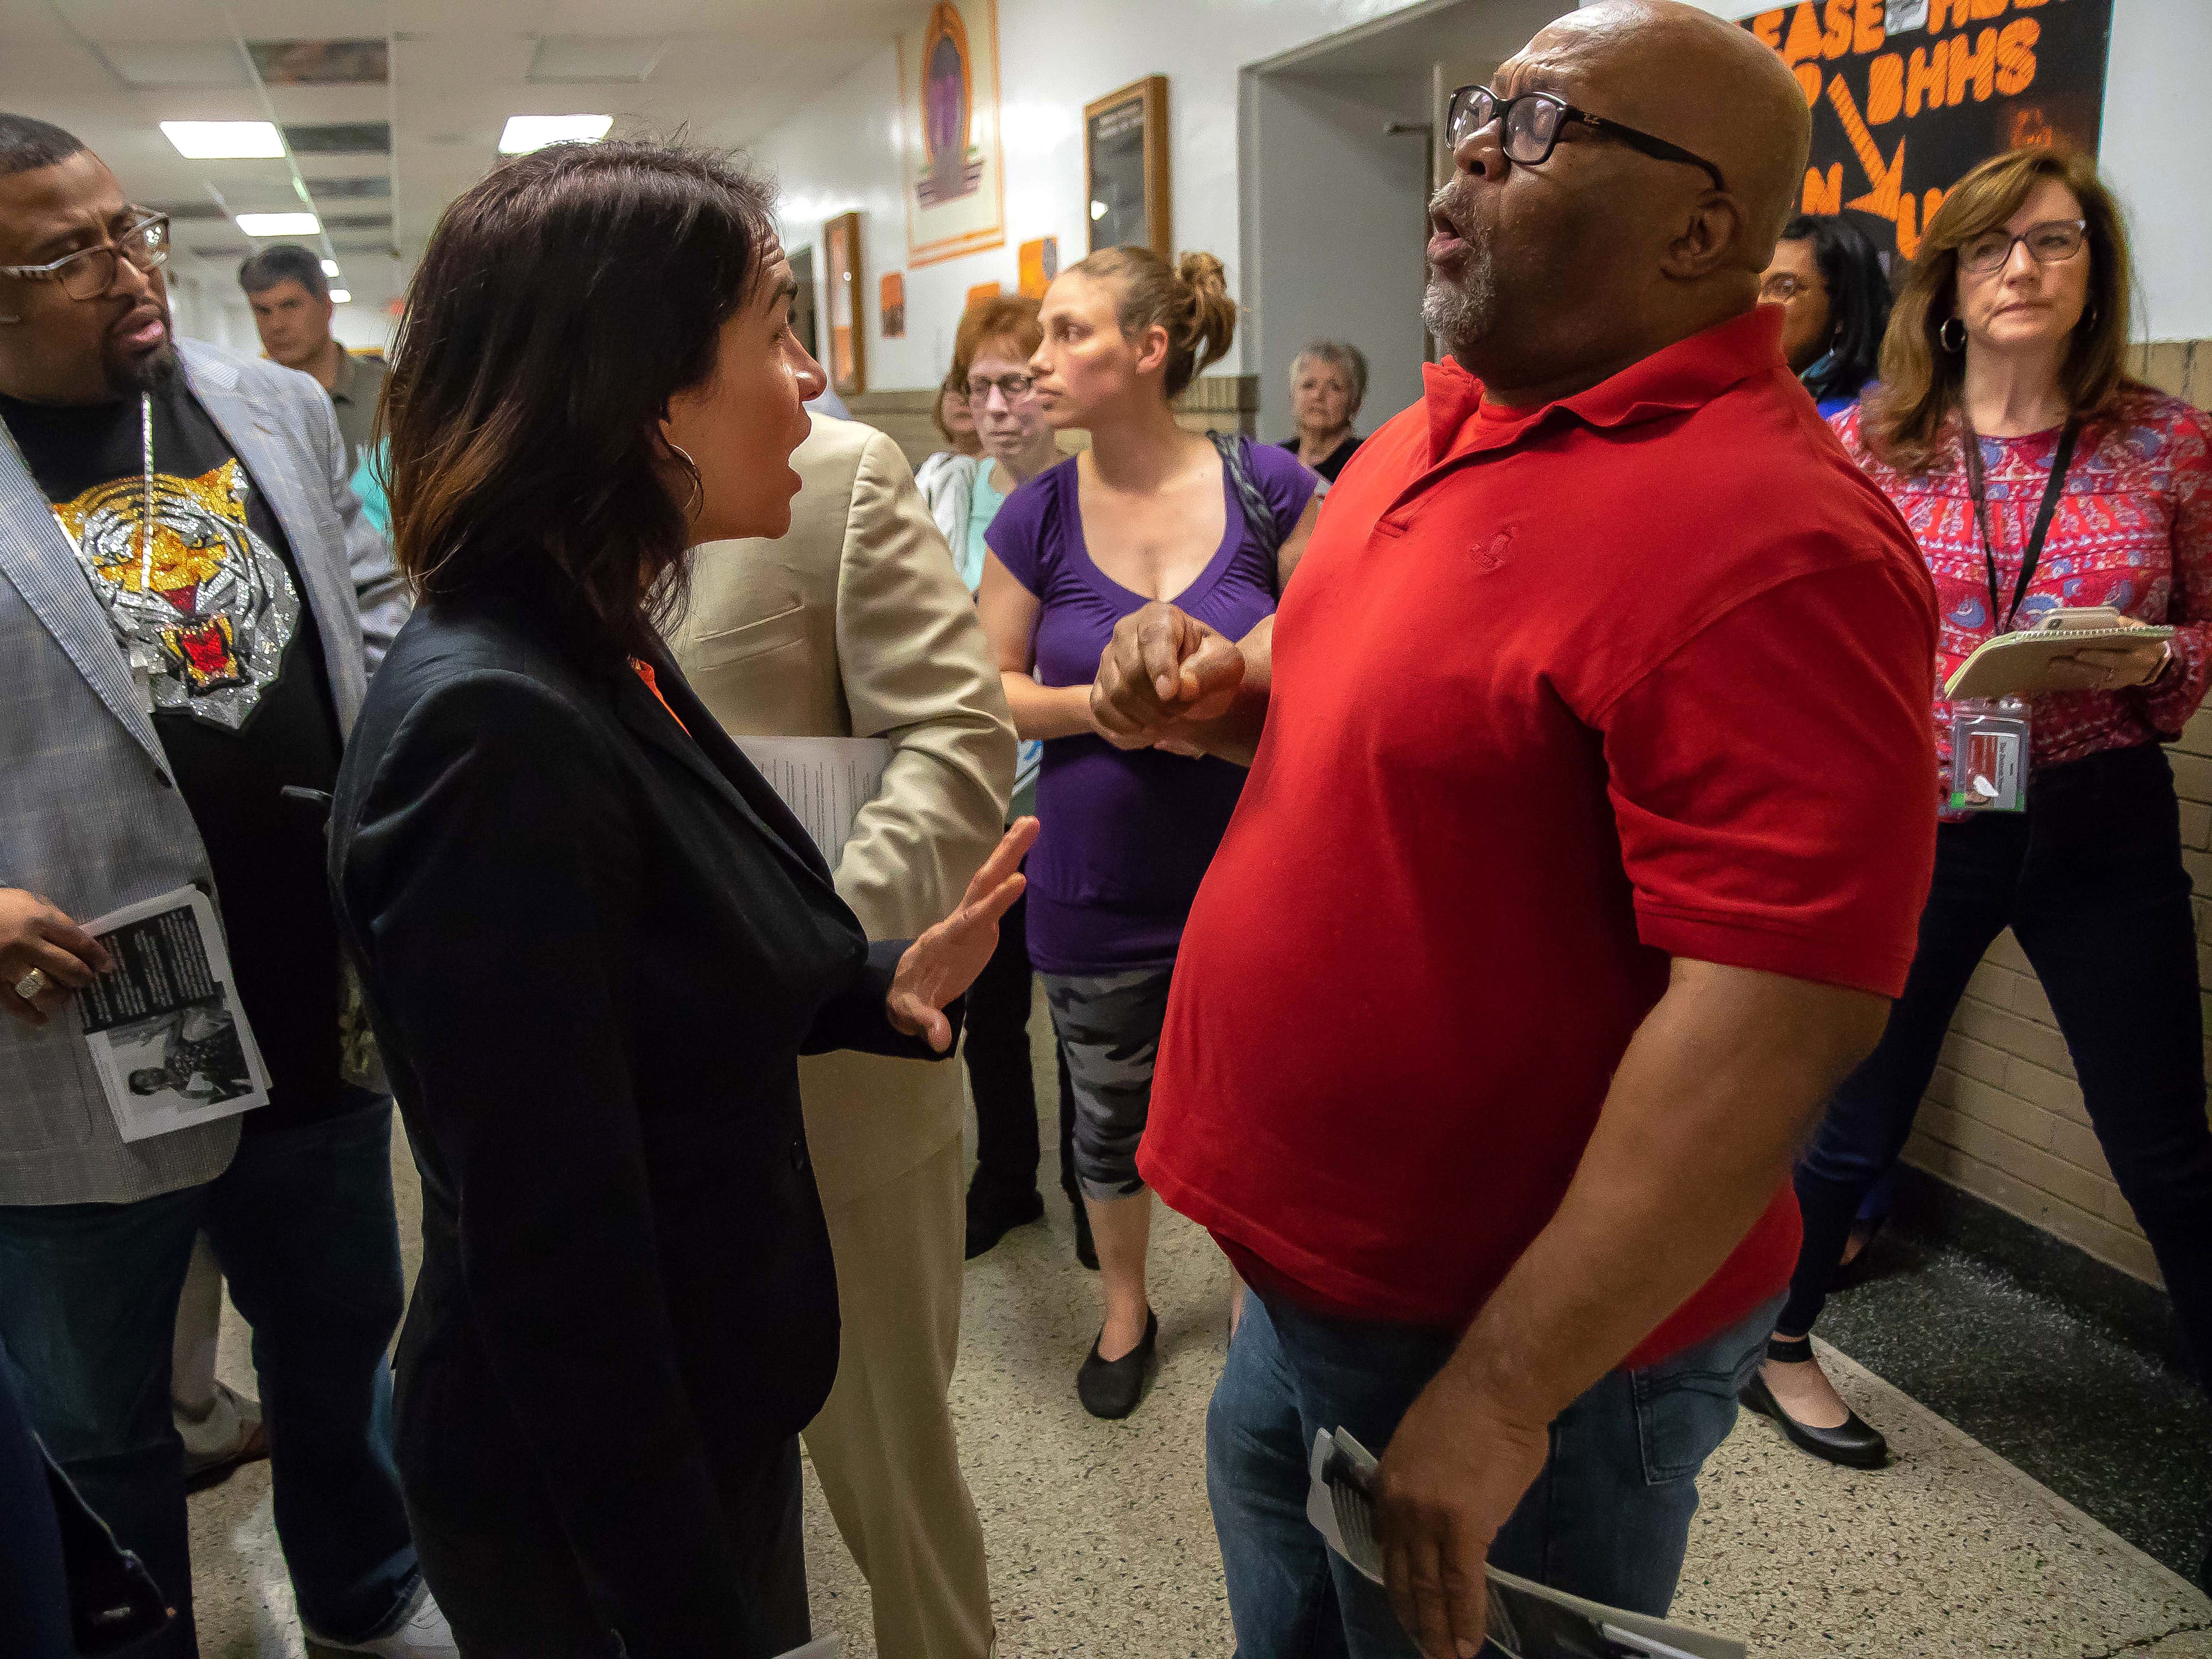 Poppy Sias-Hernandez, regional director of community affairs for Gov. Gretchen Whitmer, talks with local minister Don McAfee at Benton Harbor High School, which the state says must close to salvage the struggling district.